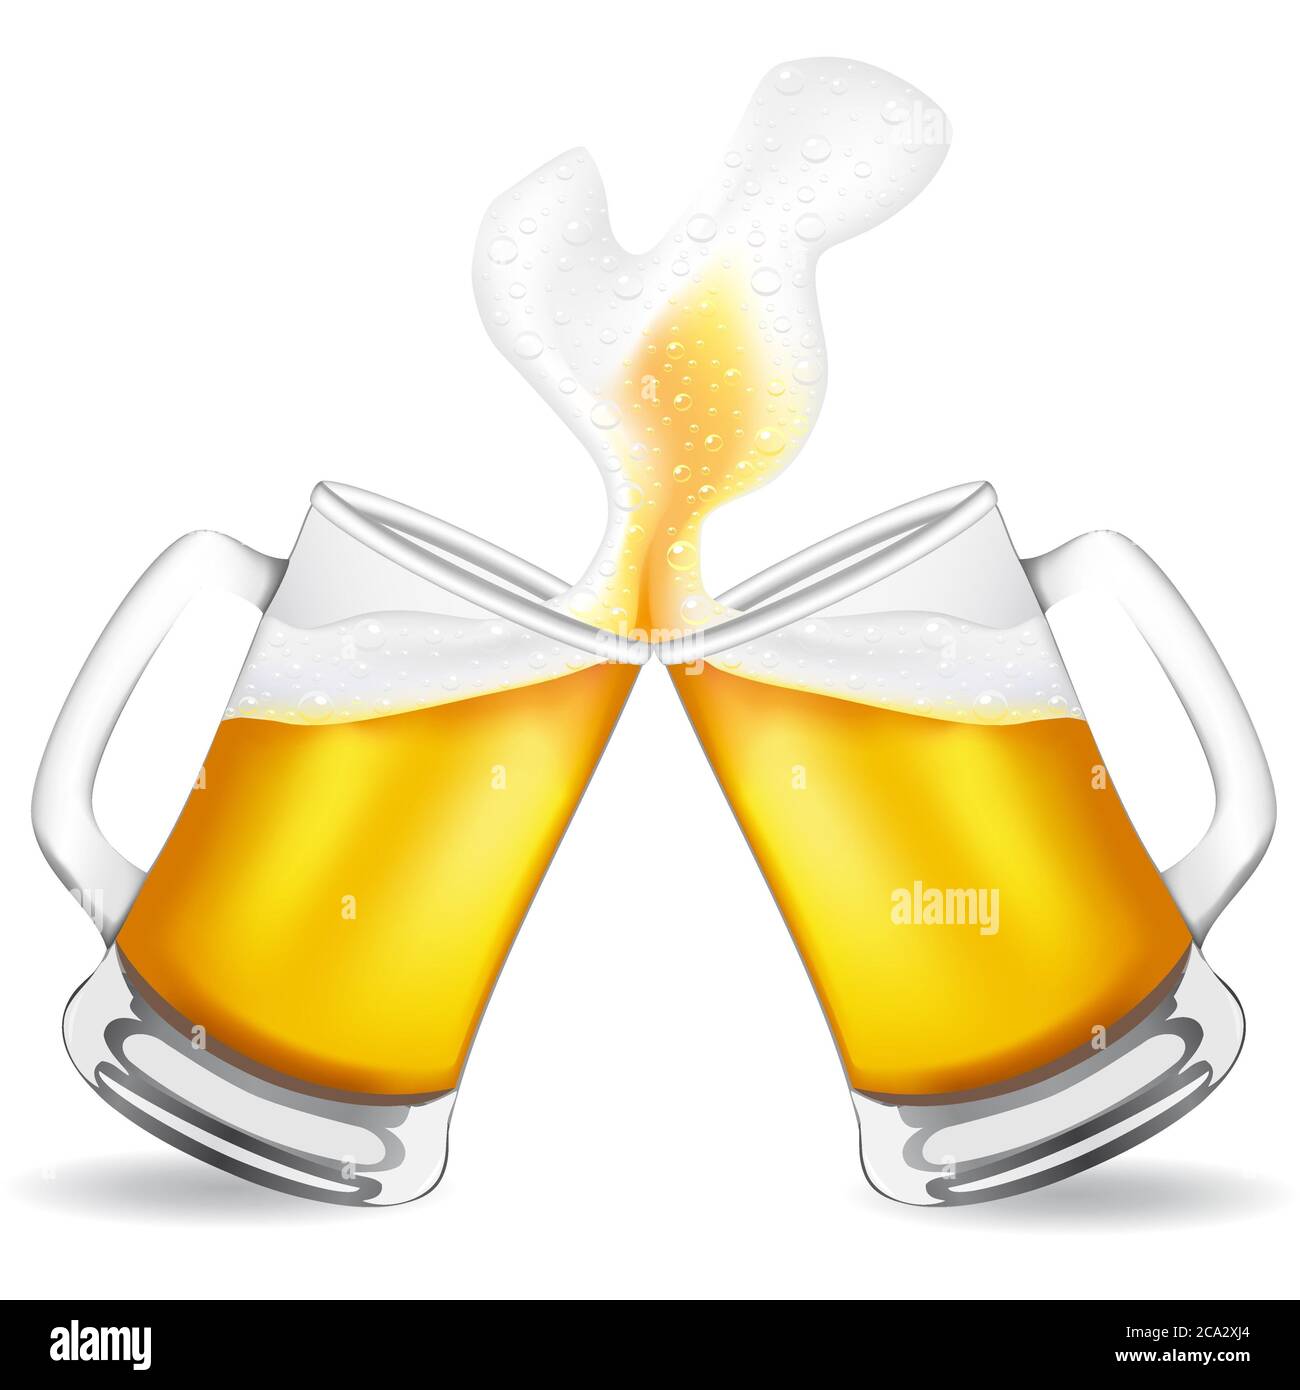 https://c8.alamy.com/comp/2CA2XJ4/beer-in-glass-vector-illustration-isolated-on-white-background-2CA2XJ4.jpg